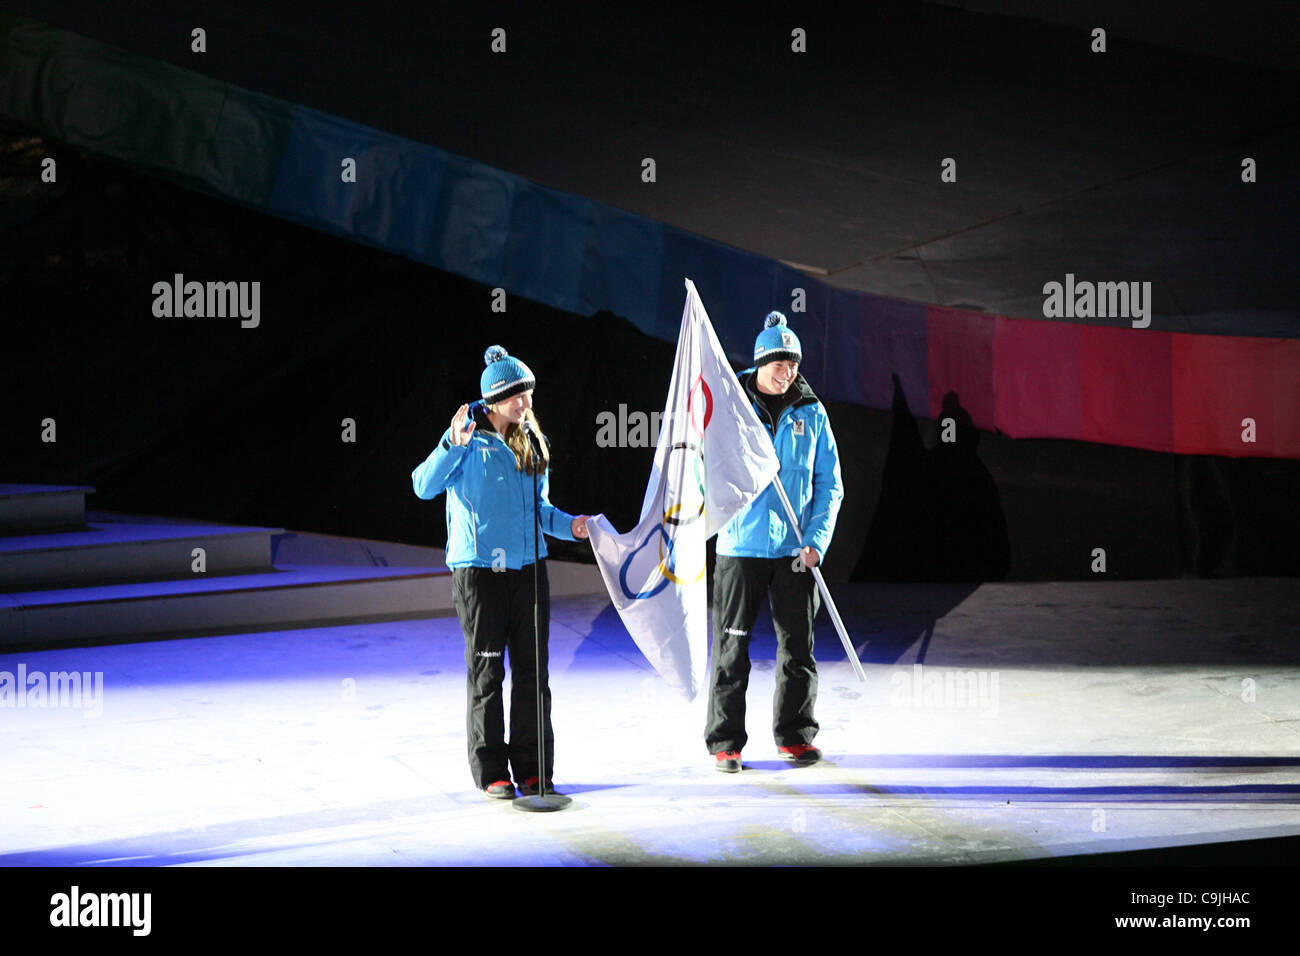 13.01.2012.  Innsbruck, Austria. Christina Ager (AUT) during the Winter Youth Olympic Games Opening Ceremony. Christina Ager pronouncing the Olympic oath of the athletes and forget it and saying 'scheisse' on 13/01/2012 in Innsbruck, Austria. Stock Photo